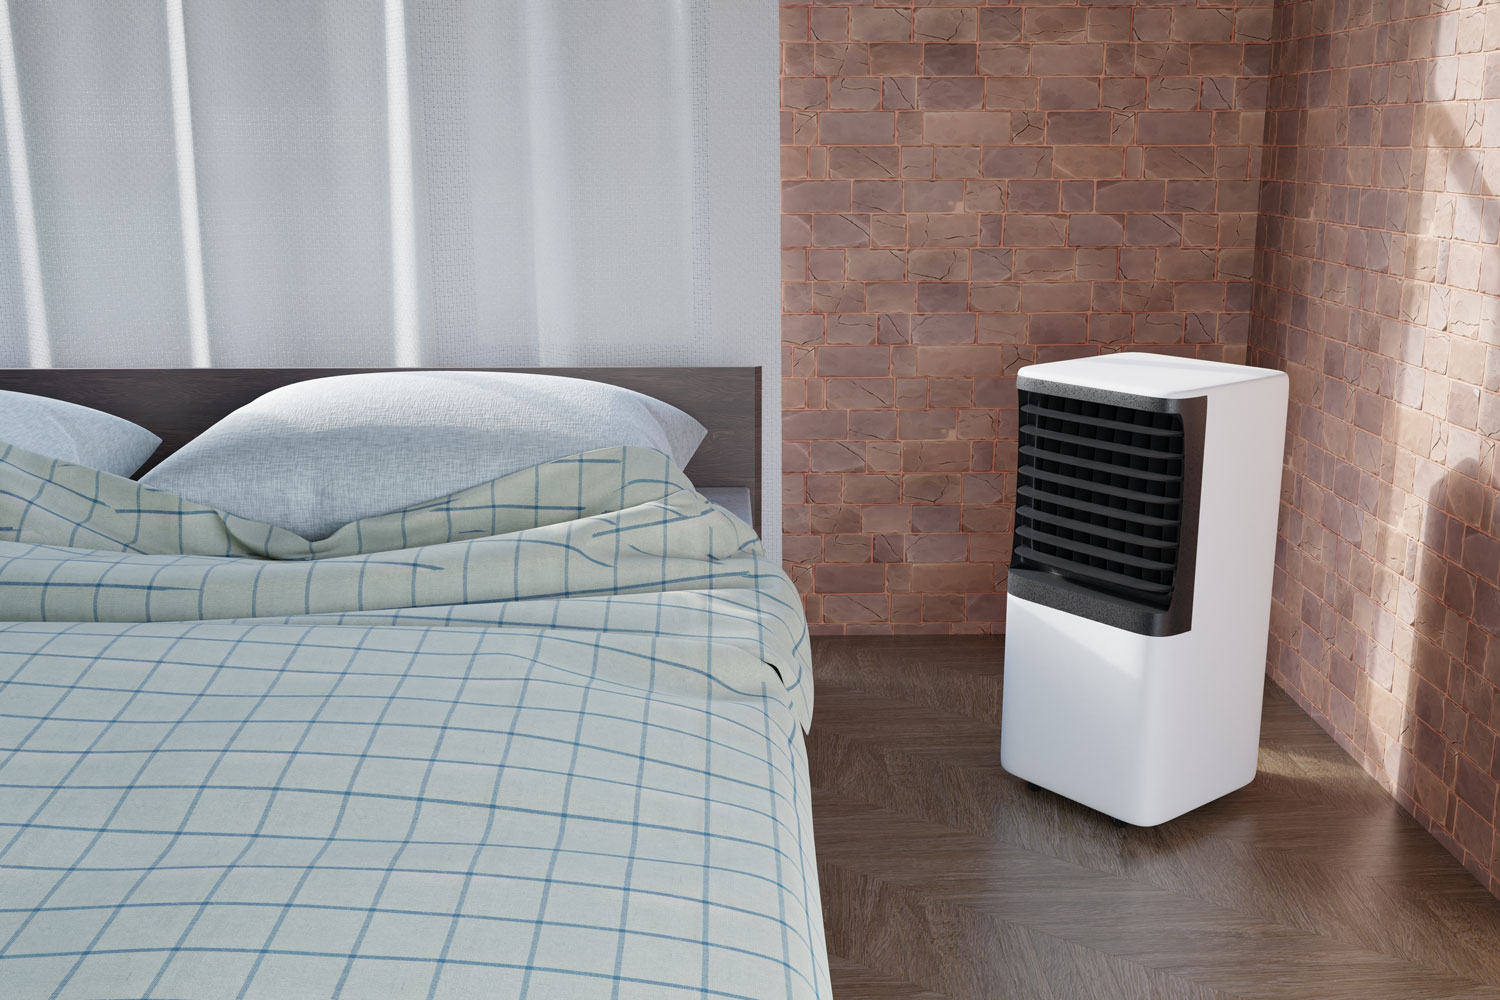 white portable air conditioner in the room next to the bed